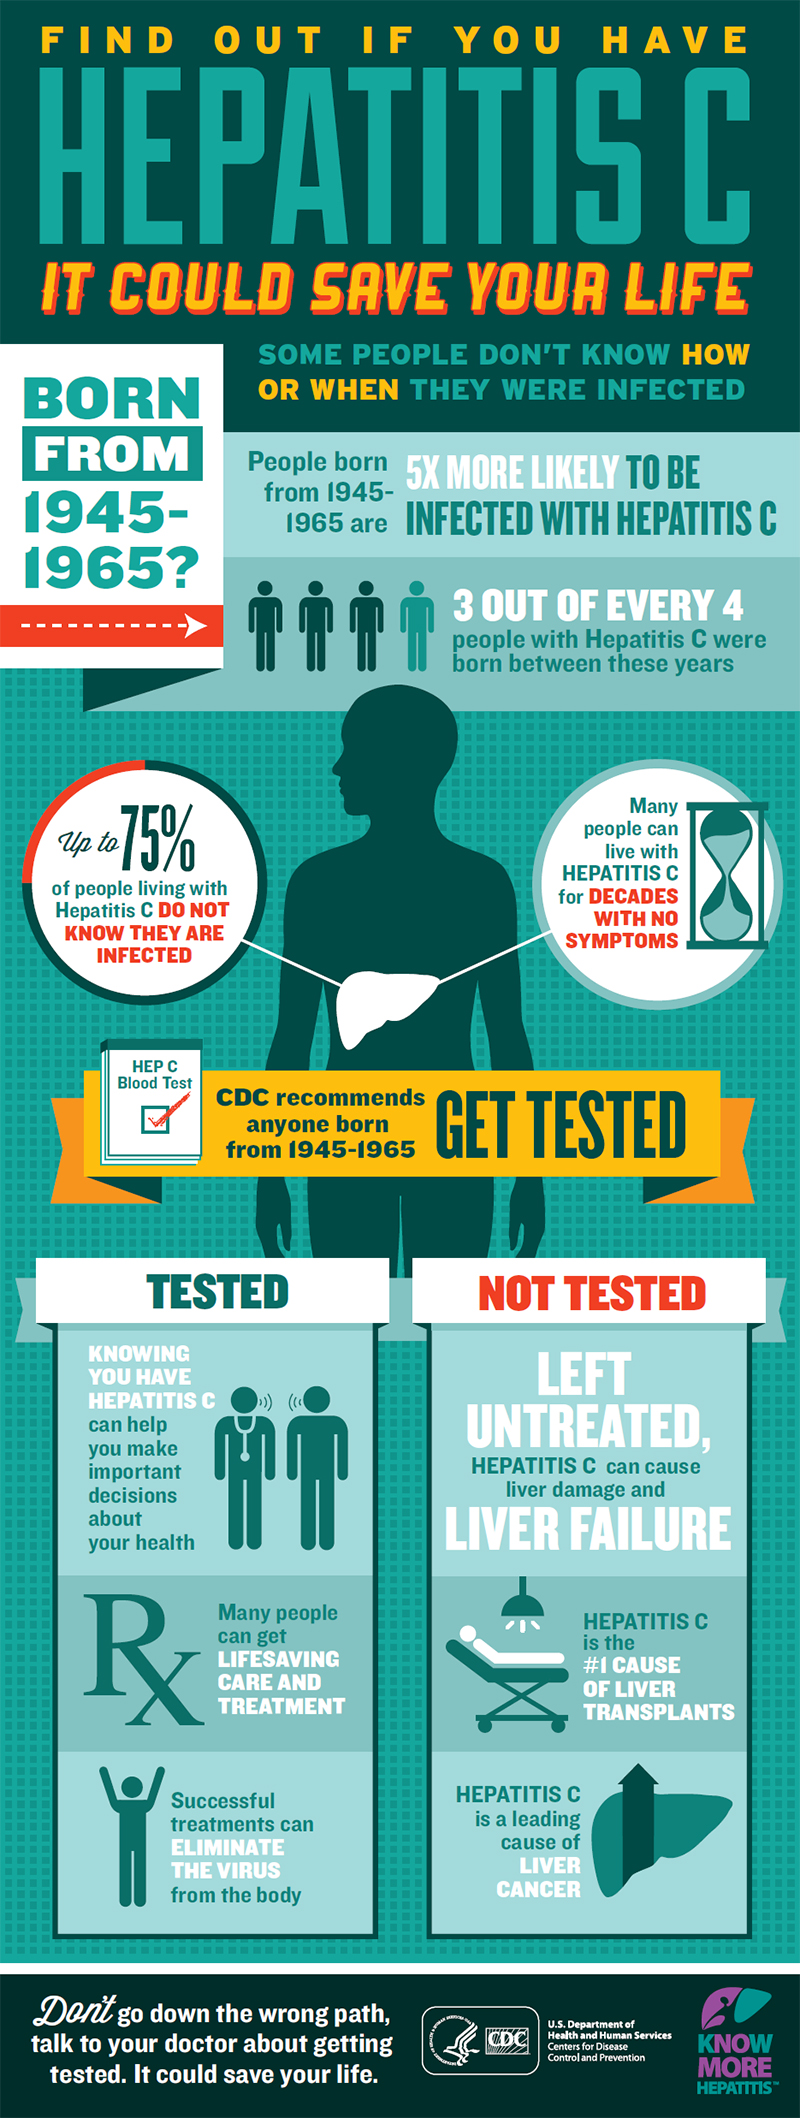 This is a vertical info-graphic, containing a header, footer, and three main sections between them.  The header reads, 'FIND OUT IF YOU HAVE HEPATITIS C - IT COULD SAVE YOUR LIFE. SOME PEOPLE DON’T KNOW HOW OR WHEN THEY WERE INFECTED.'  The first section below the header reads, "BORN FROM 1945-1965? People born from 1945-1965 are 5X MORE LIKELY TO BE INFECTED WITH HEPATITIS C. 3 OUT OF EVERY 4 people with Hepatitis C were born between these years.'  The next section contains a silhouette of a human figure with the liver highlighted.  Two text circles connect to the liver with lines.  The text in the first circle reads, 'Up to 75% of people living with Hepatitis C DO NOT KNOW THEY ARE INFECTED.'  The second circle has an hourglass and text that reads, 'Many people can live with HEPATITIS C for DECADES WITH NO SYMPTOMS.'  Below the two text circles is a banner across the human silhouette’s abdomen.  On the left side of the banner is a small to-do-list with a single item labeled 'Hep C Blood Test'. It is check-marked off. The banner text reads, 'CDC recommends anyone born from 1945-1965 GET TESTED'.  The final section before the footer has two columns, representing a choice of two paths - one, to get Tested; the other column/path, to not get tested.  Under the 'Tested' column, text reads, 'KNOWING YOU HAVE HEPATITIS C can help you make important decisions about your health. Many people can get LIFESAVING CARE AND TREATMENT. Successful treatments can ELIMINATE THE VIRUS from the body.' Under the 'Not Tested' column, the text reads, '60% of people with HEPATITIS C will develop SERIOUS LIVER PROBLEMS. Left untreated, HEPATITIS C can cause LIVER DAMAGE & LIVER FAILURE. HEPATITIS C is a leading cause of LIVER CANCER. The footer has the logos for CDC-HHS and Know More Hepatitis on the right-hand side and text on the left that reads, 'Don’t go down the wrong path, talk to your doctor about getting tested. It could save your life.’